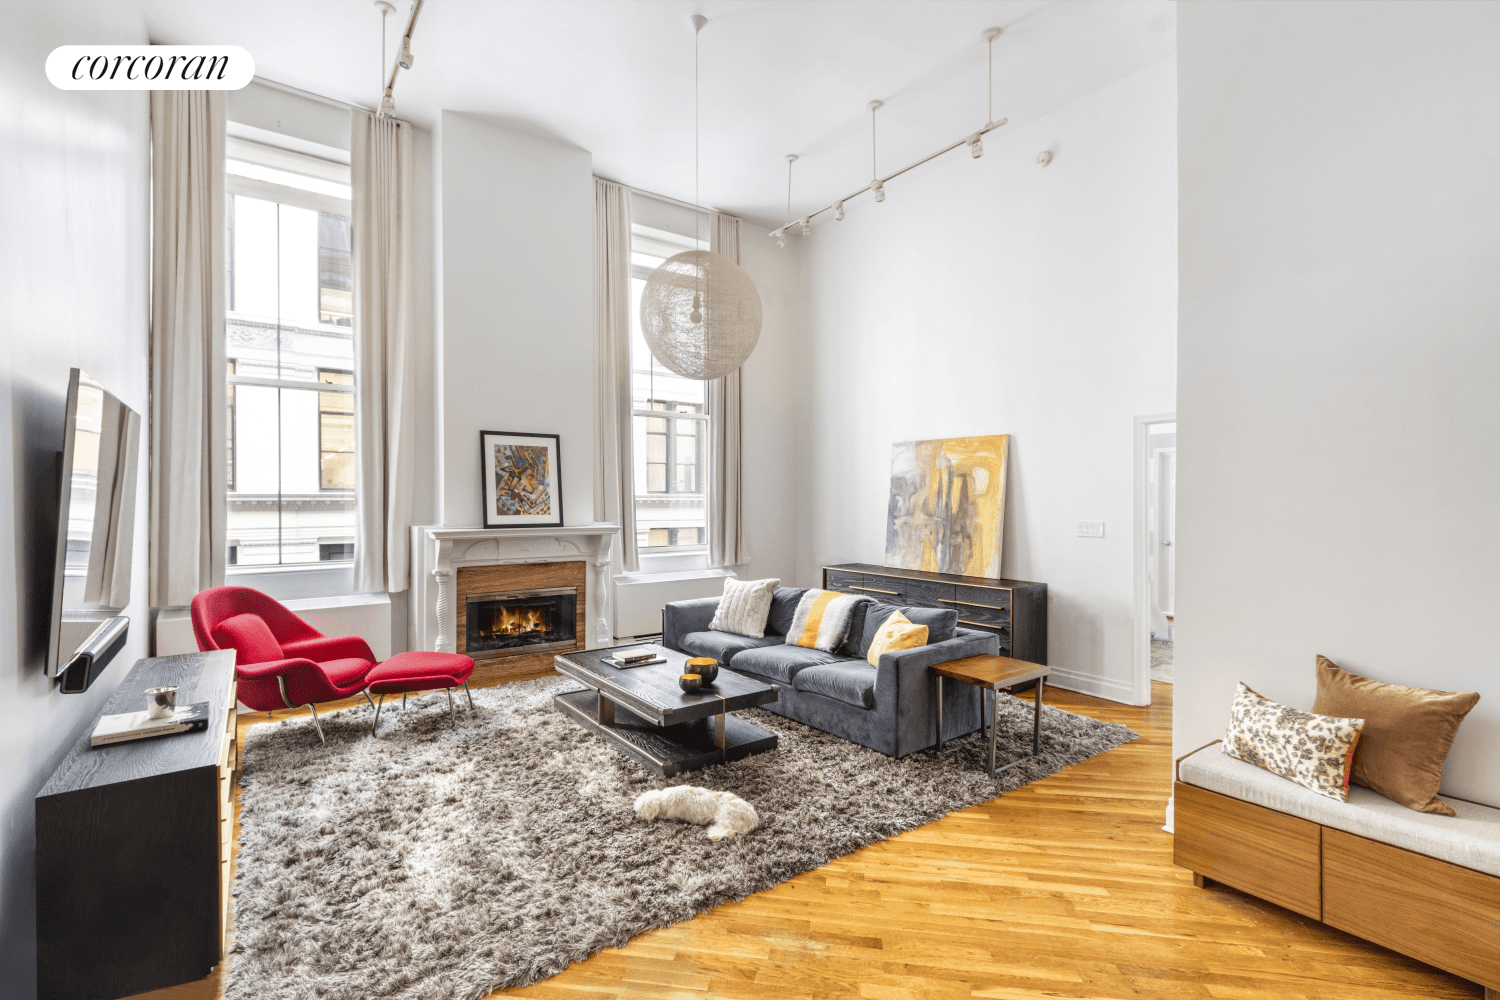 Chelsea loft with soaring 15 foot ceilings and renovated kitchen and baths.